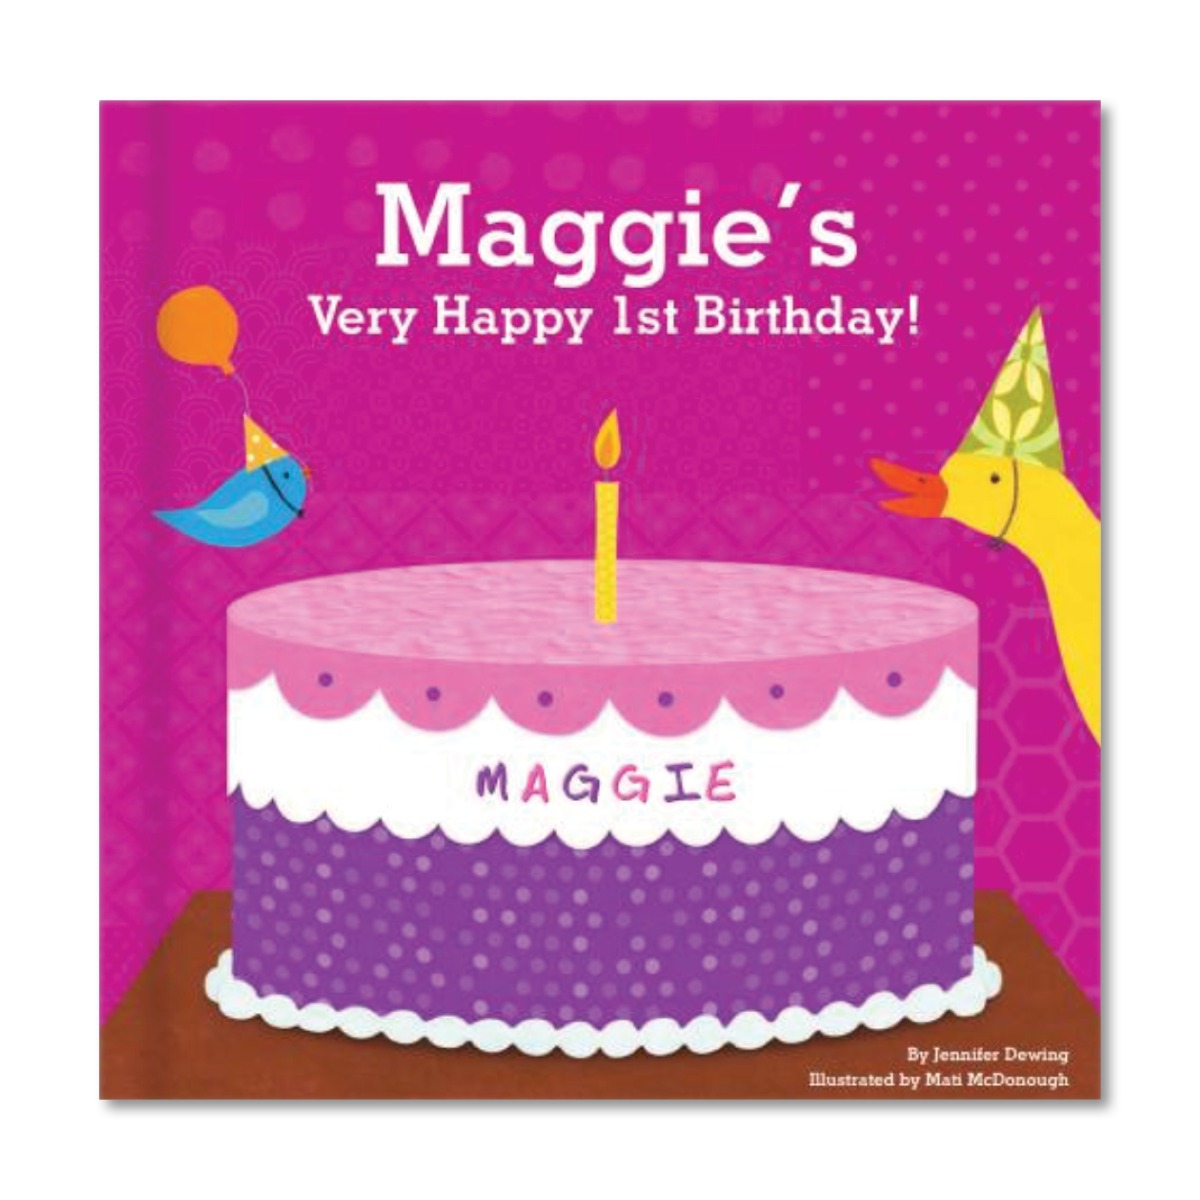 My Very Happy Birthday Book for Girls | I See Me!